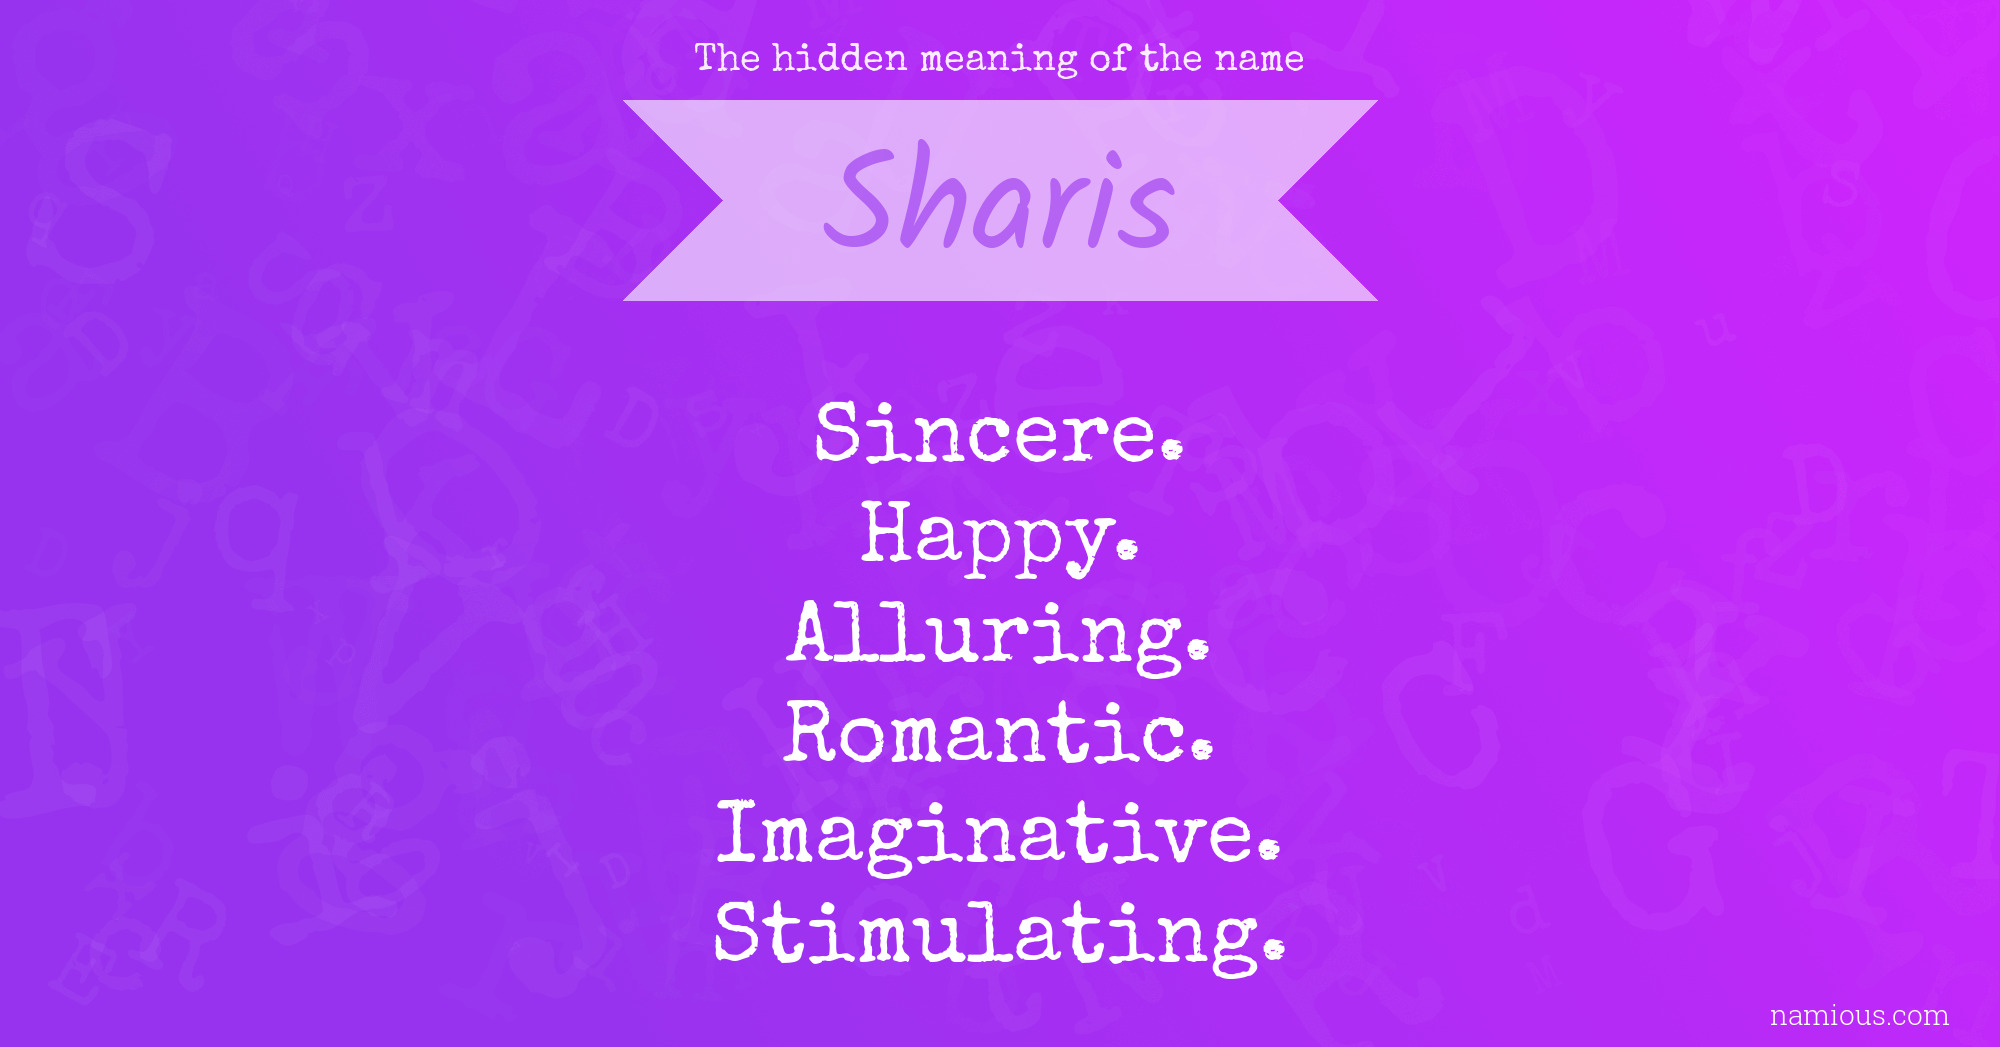 The hidden meaning of the name Sharis